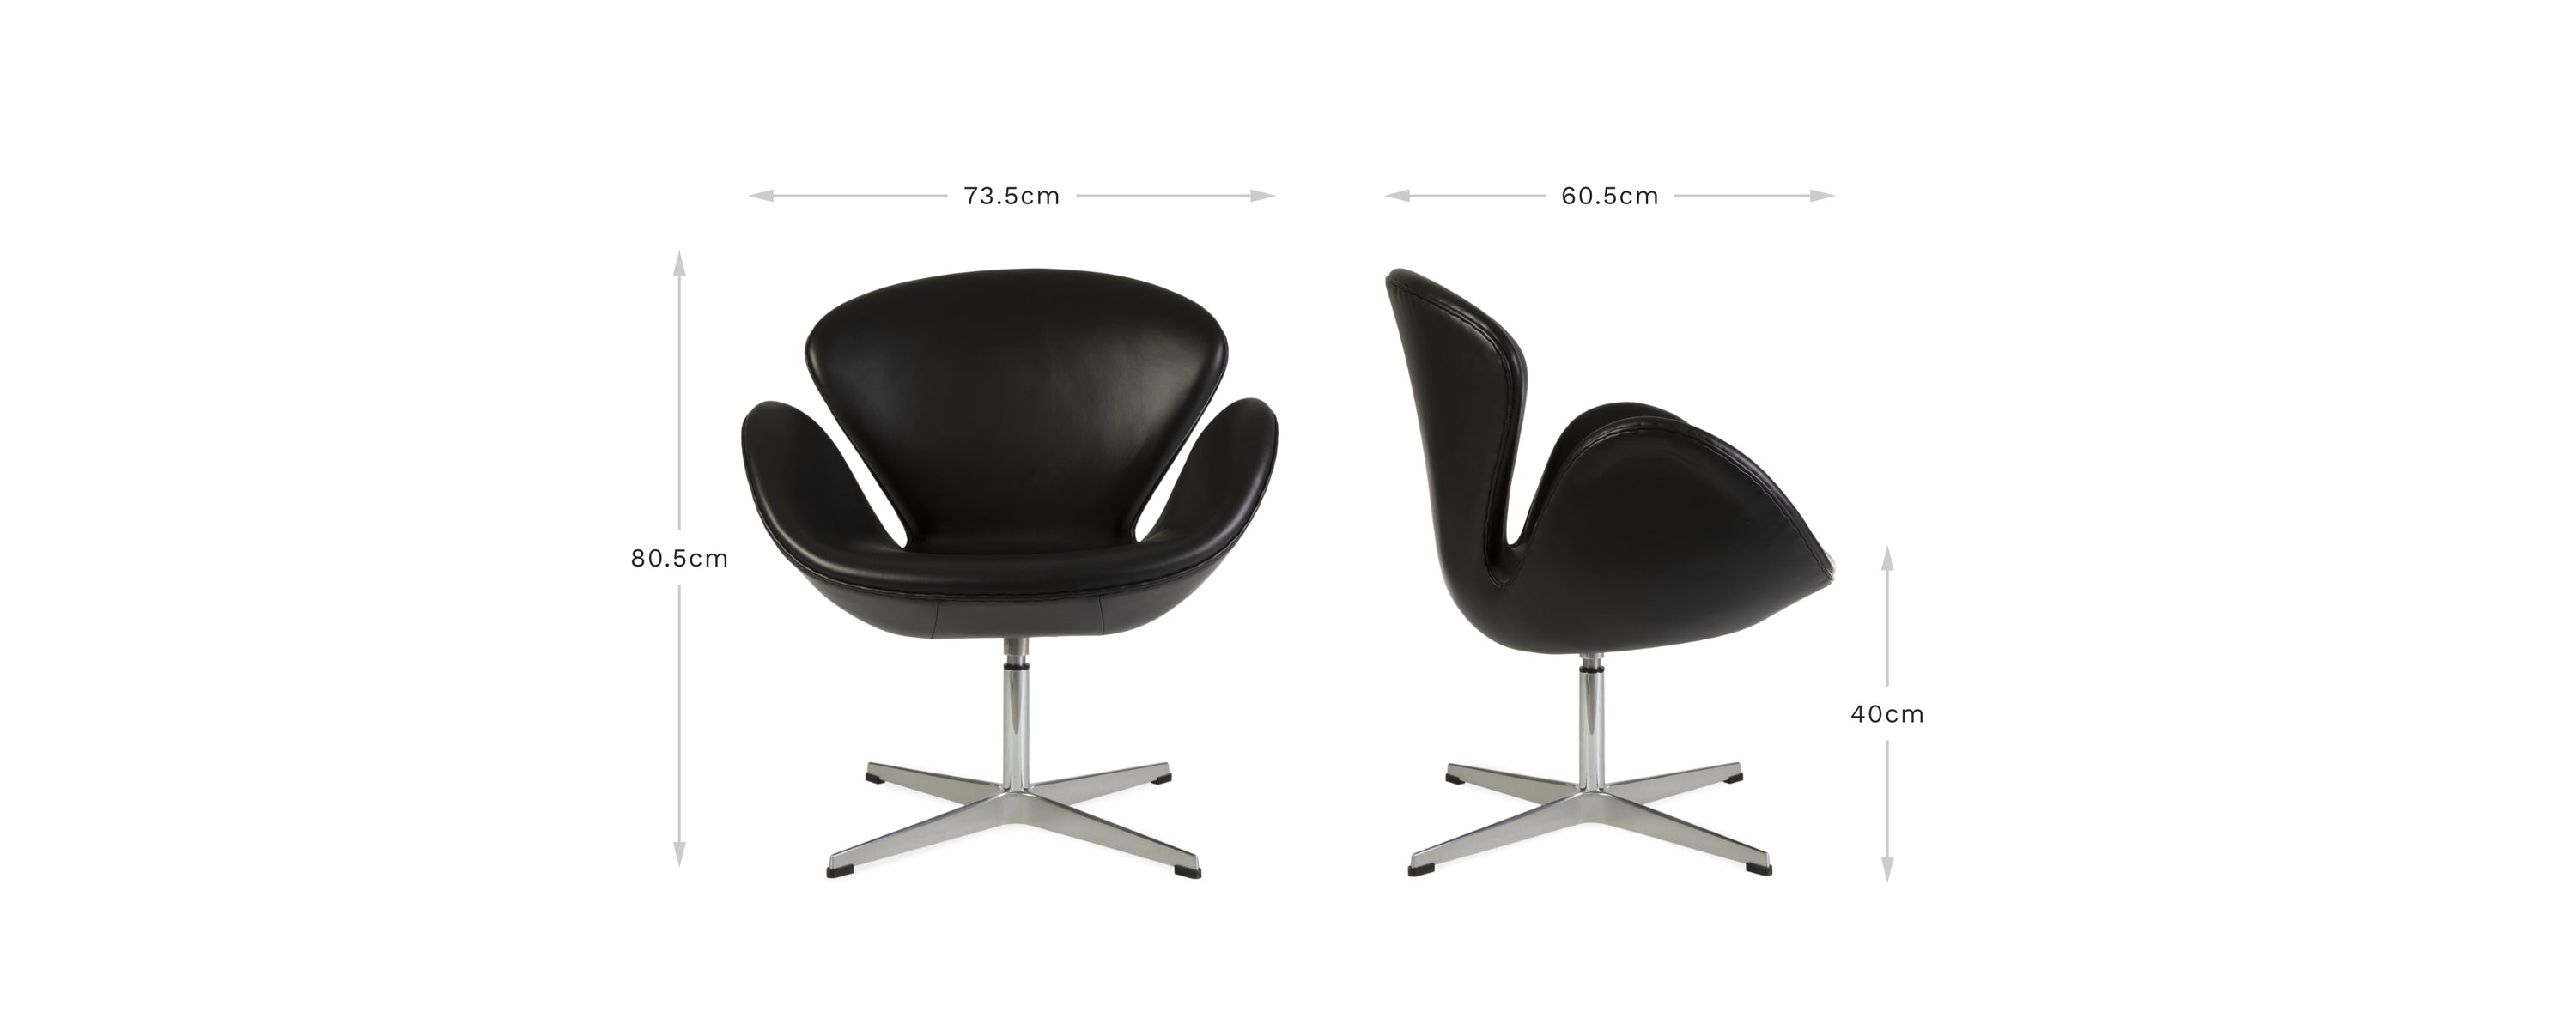 View of front and side of the black leather Jacobsen Swan chair on a white background displaying the dimensions